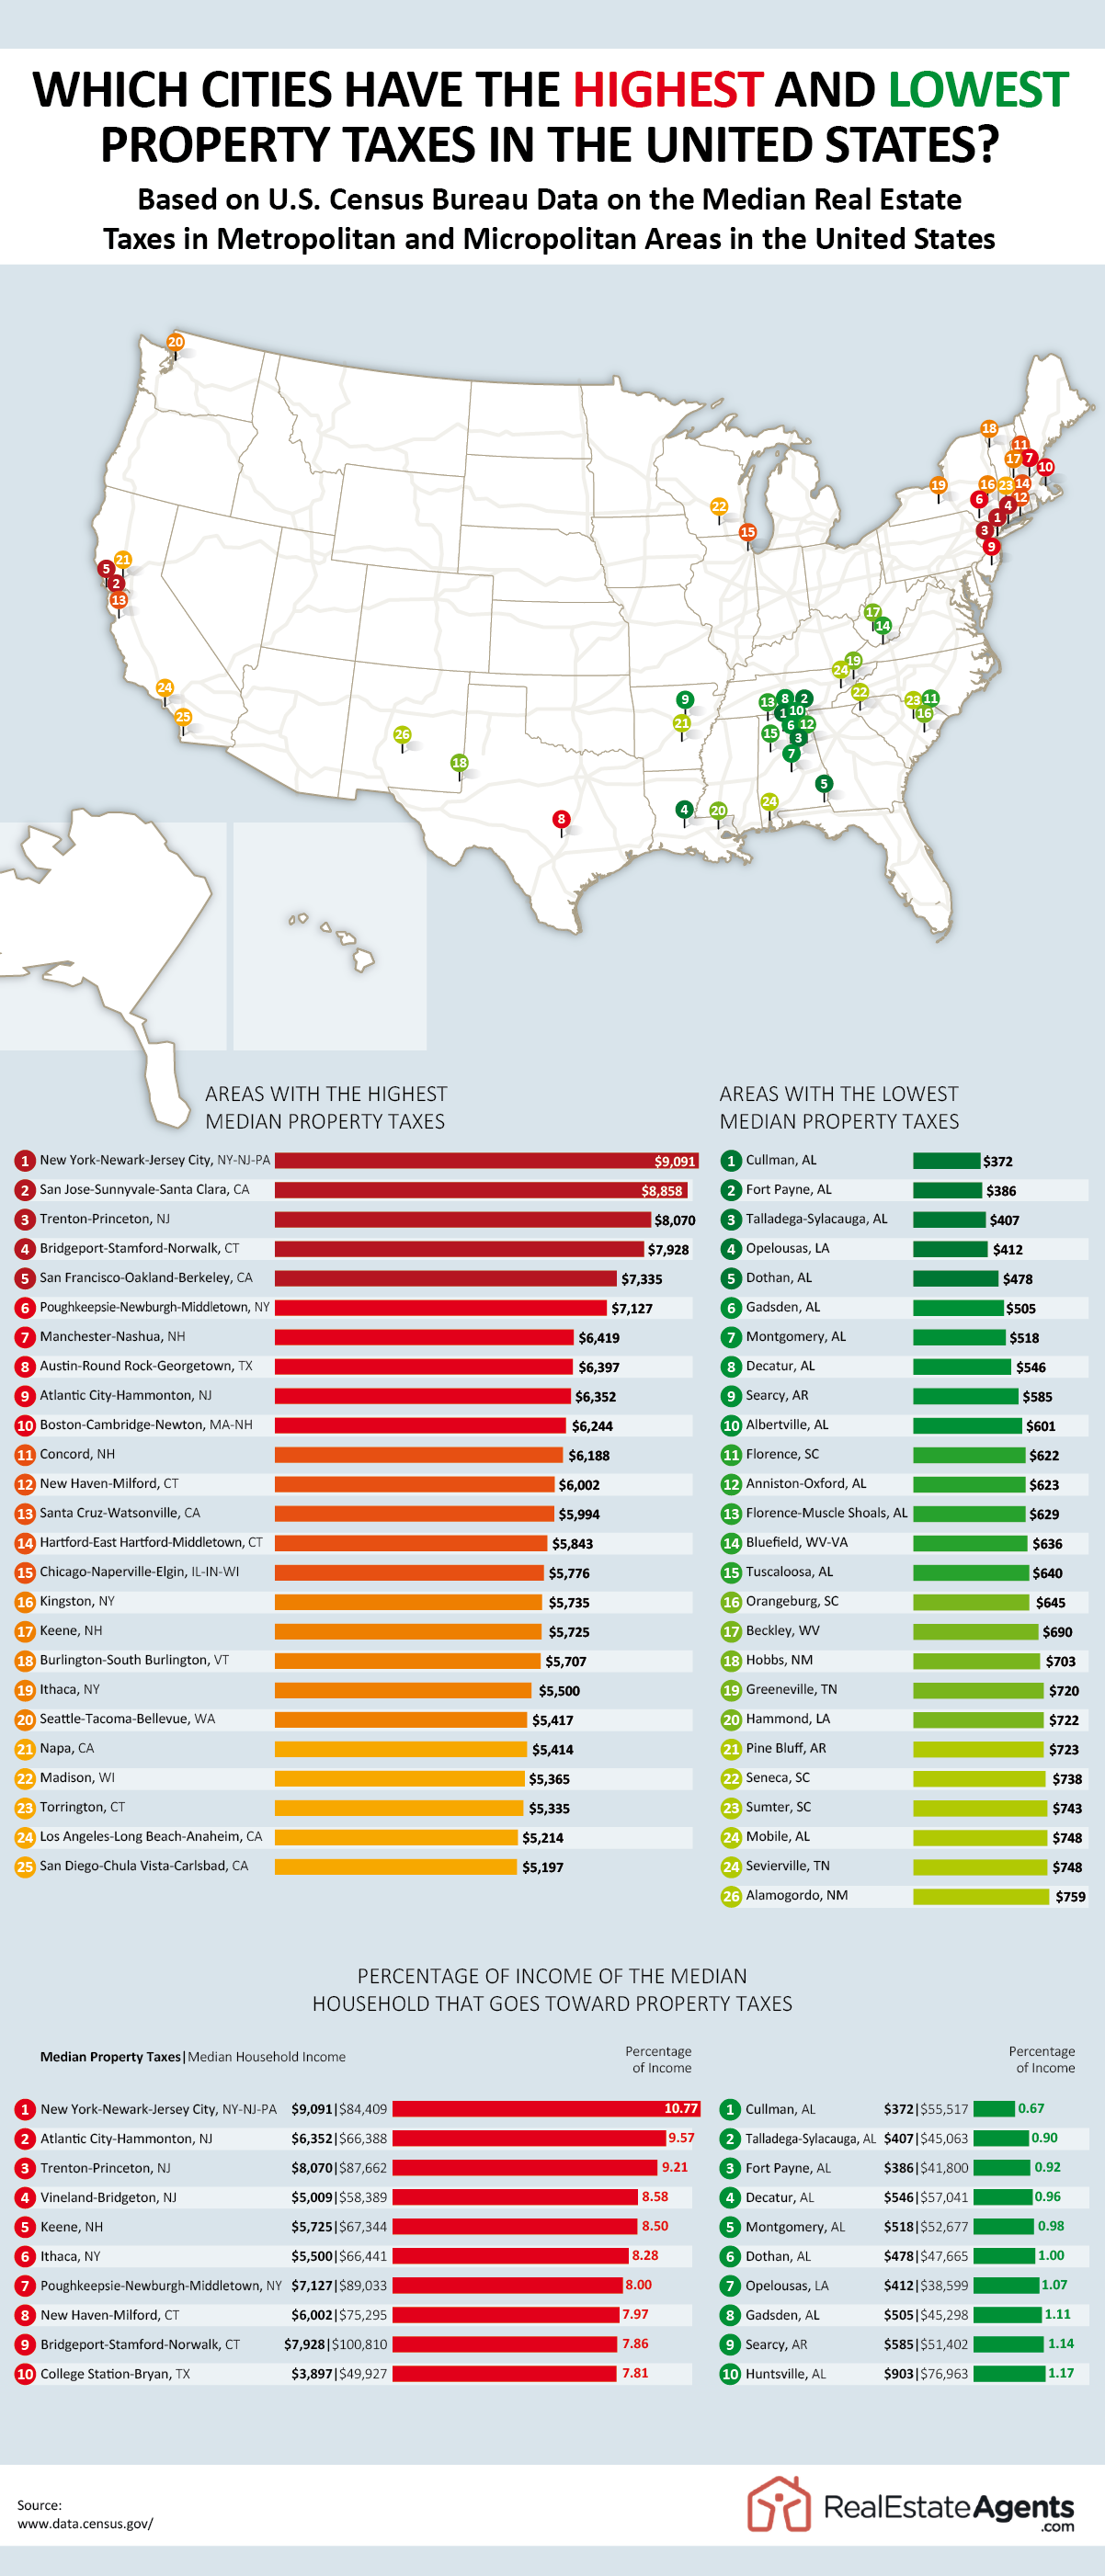 Which Cities Have the Highest and Lowest Property Taxes in the United States?